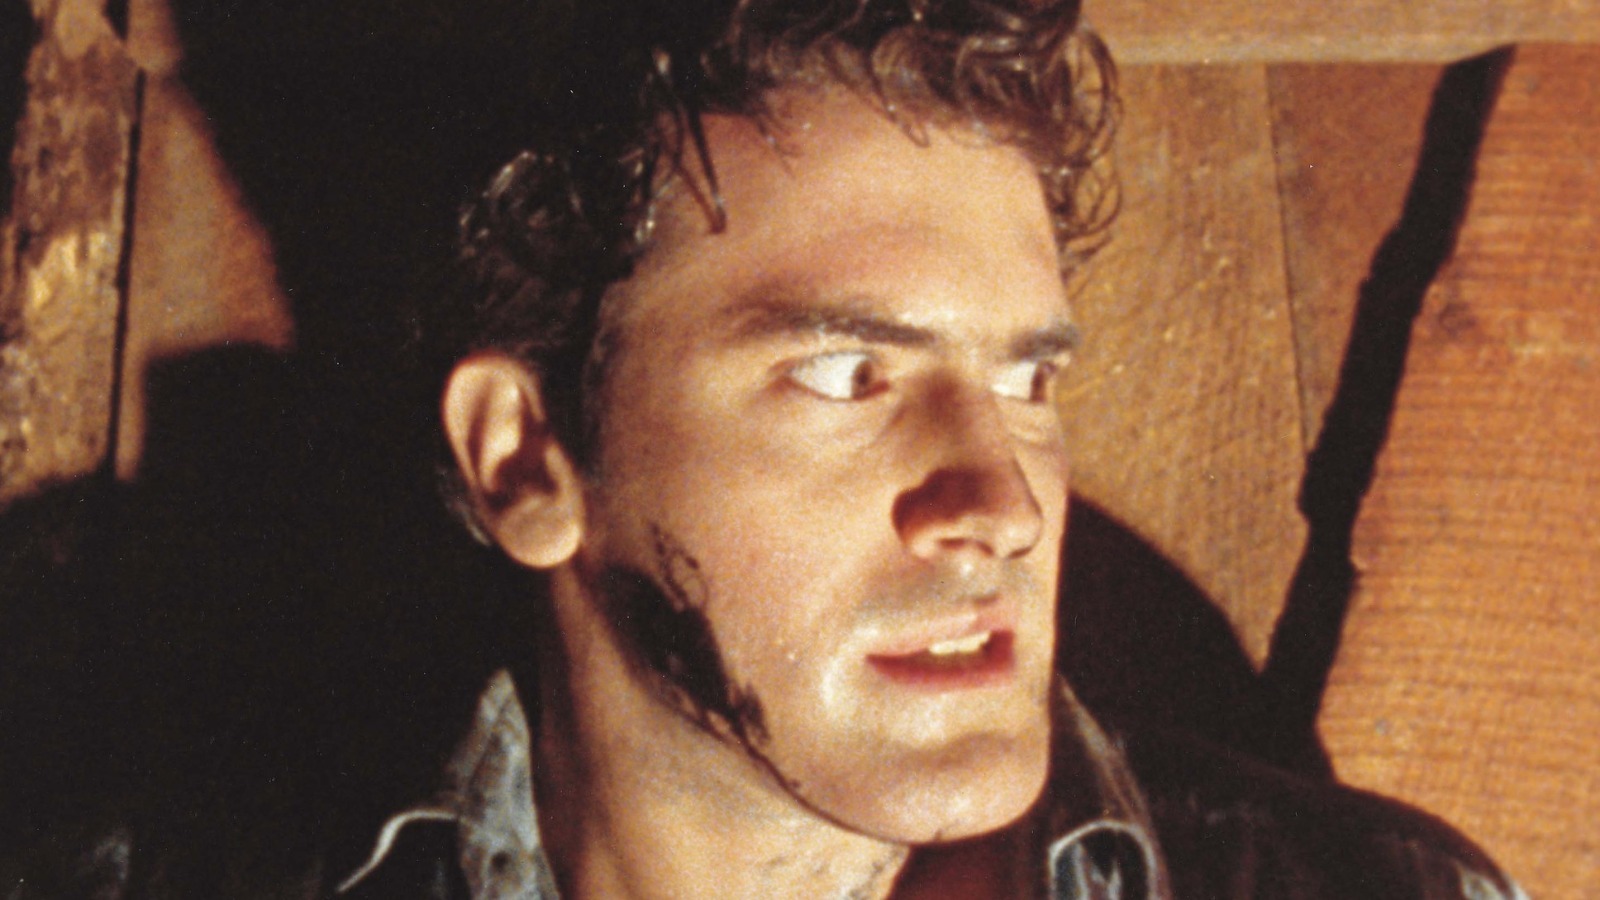 Evil Dead II Ending Explained: Ash Vs. The Concept Of Horror Movies